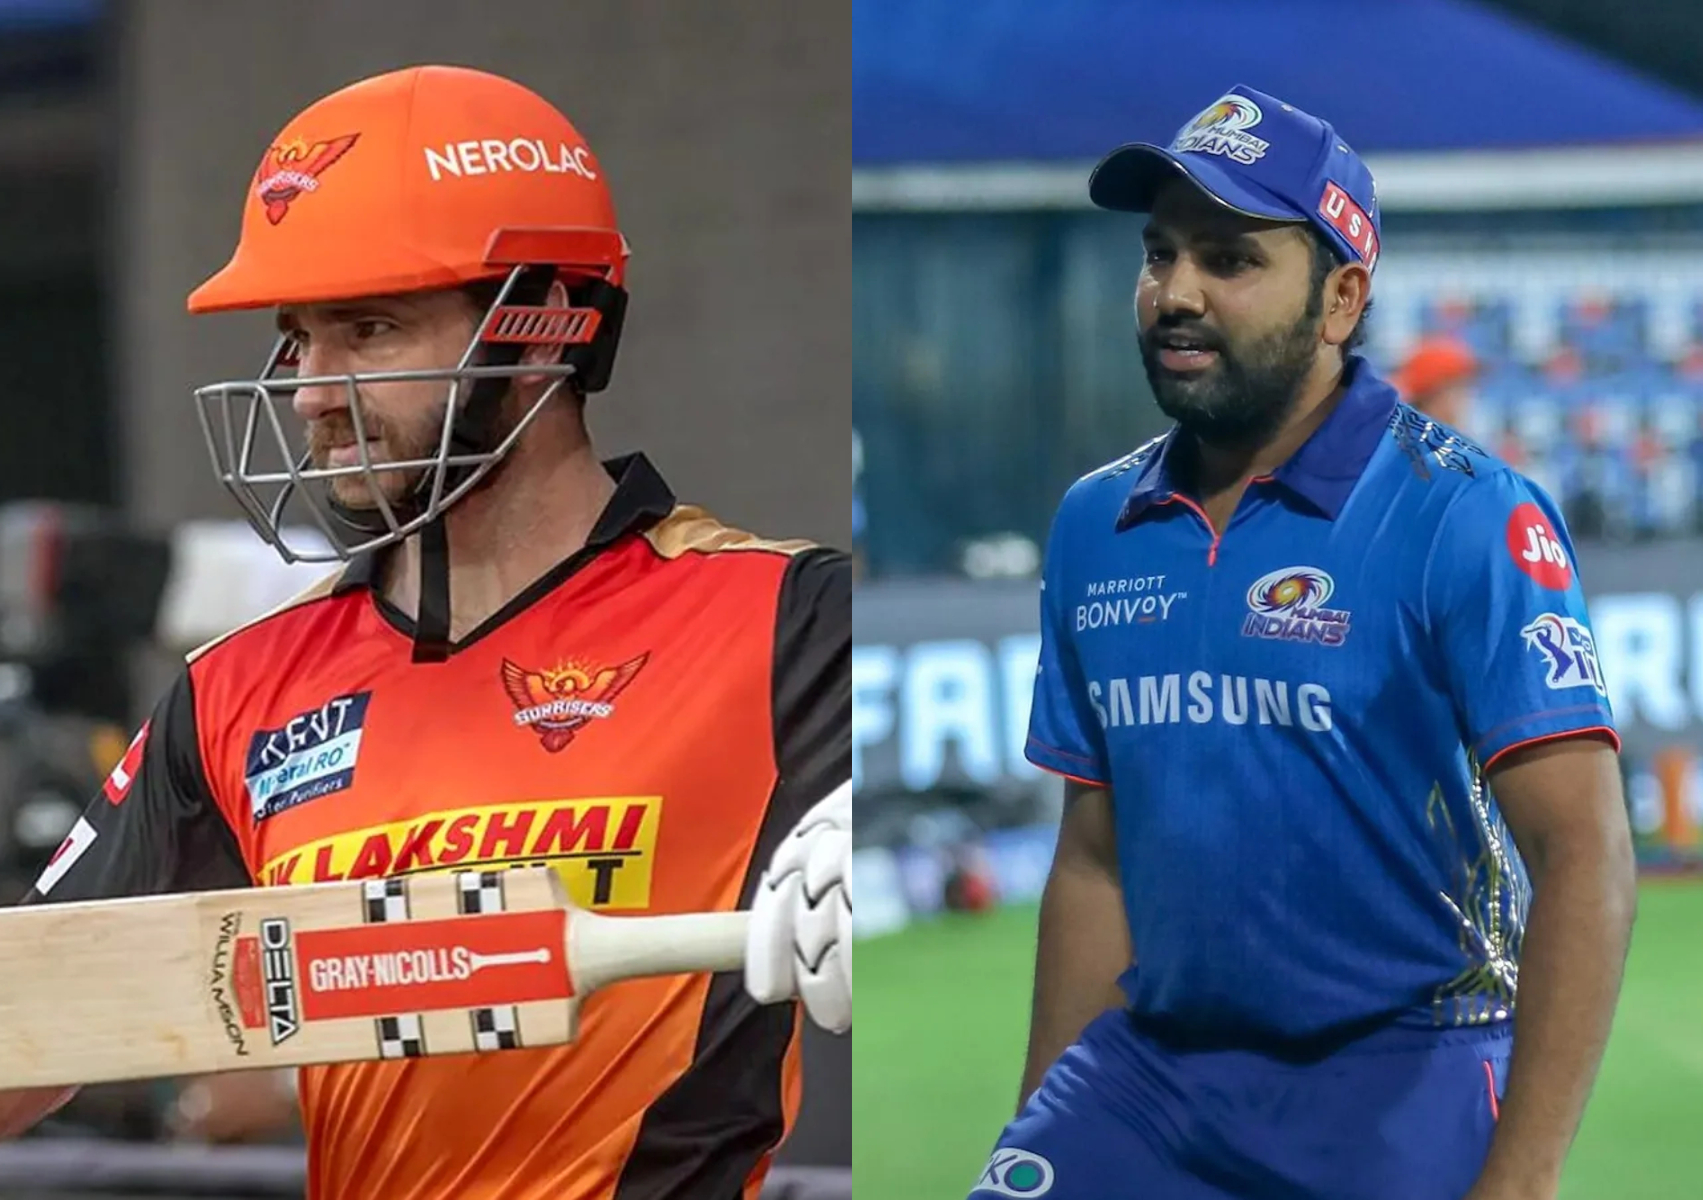 MI needs to beat SRH by 171 runs batting first if they make 200; if MI chases, they can't qualify for playoffs | Twitter